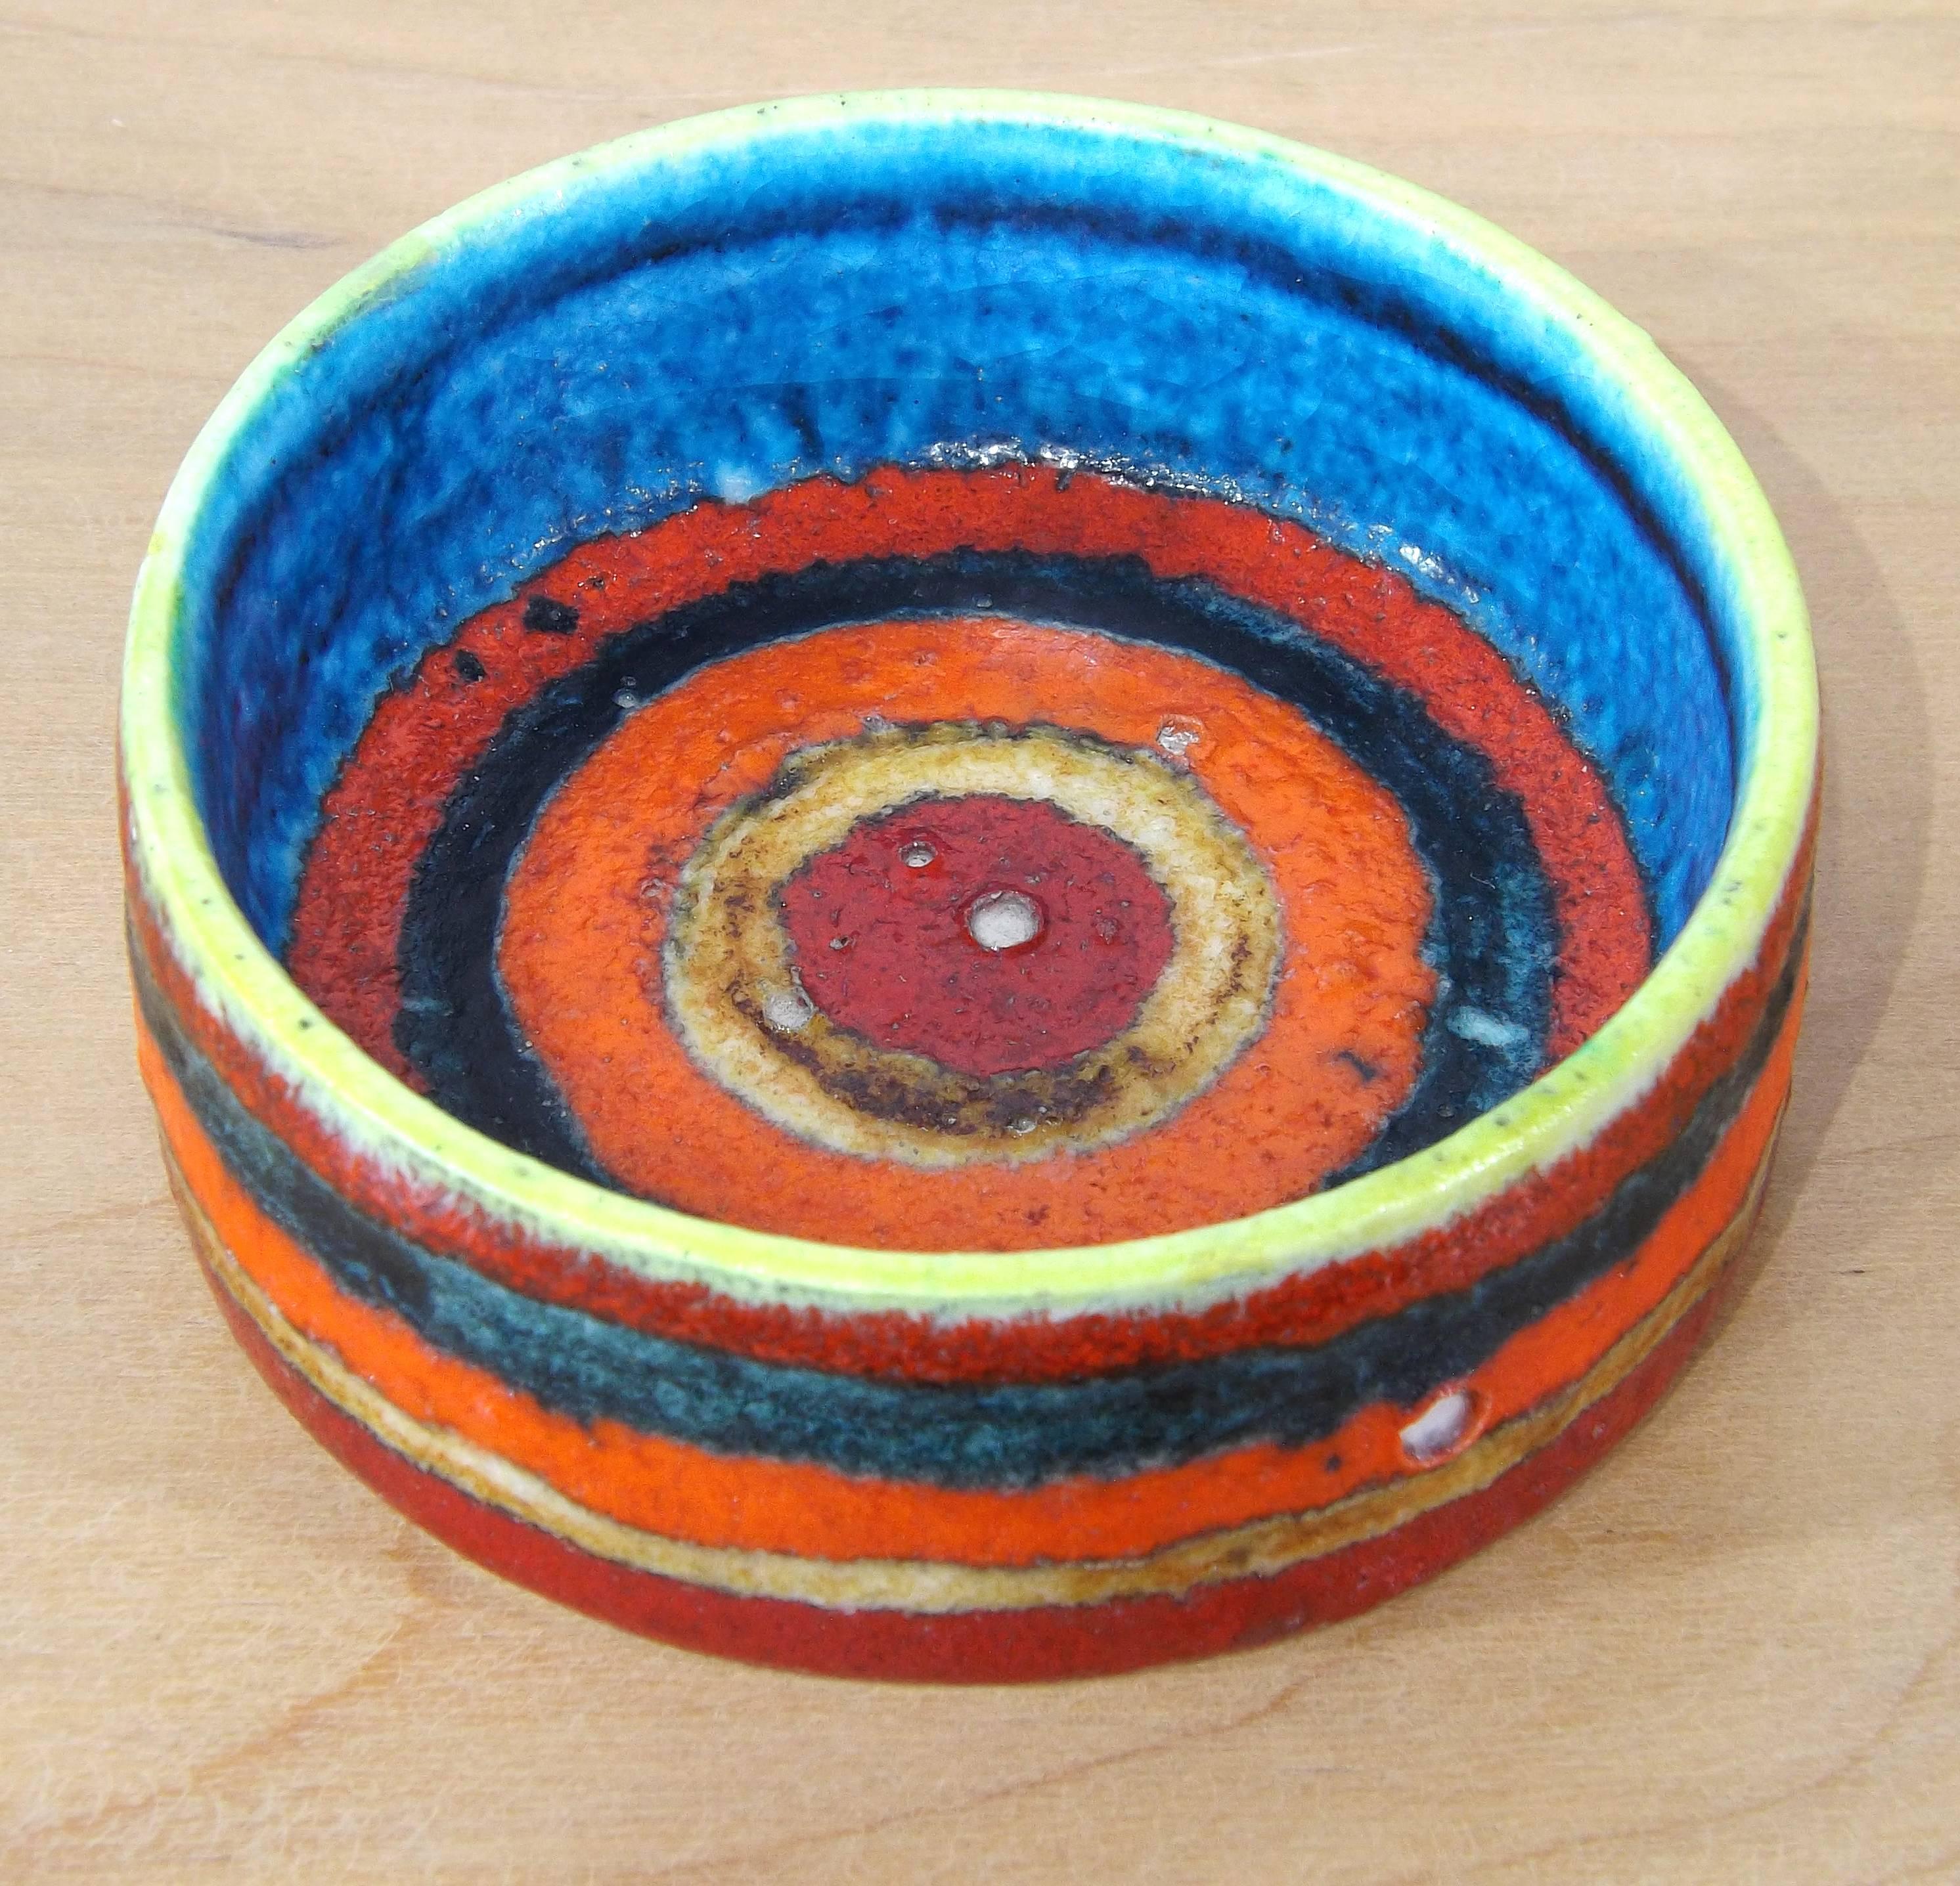 A colorful bowl by Guido Gambone.